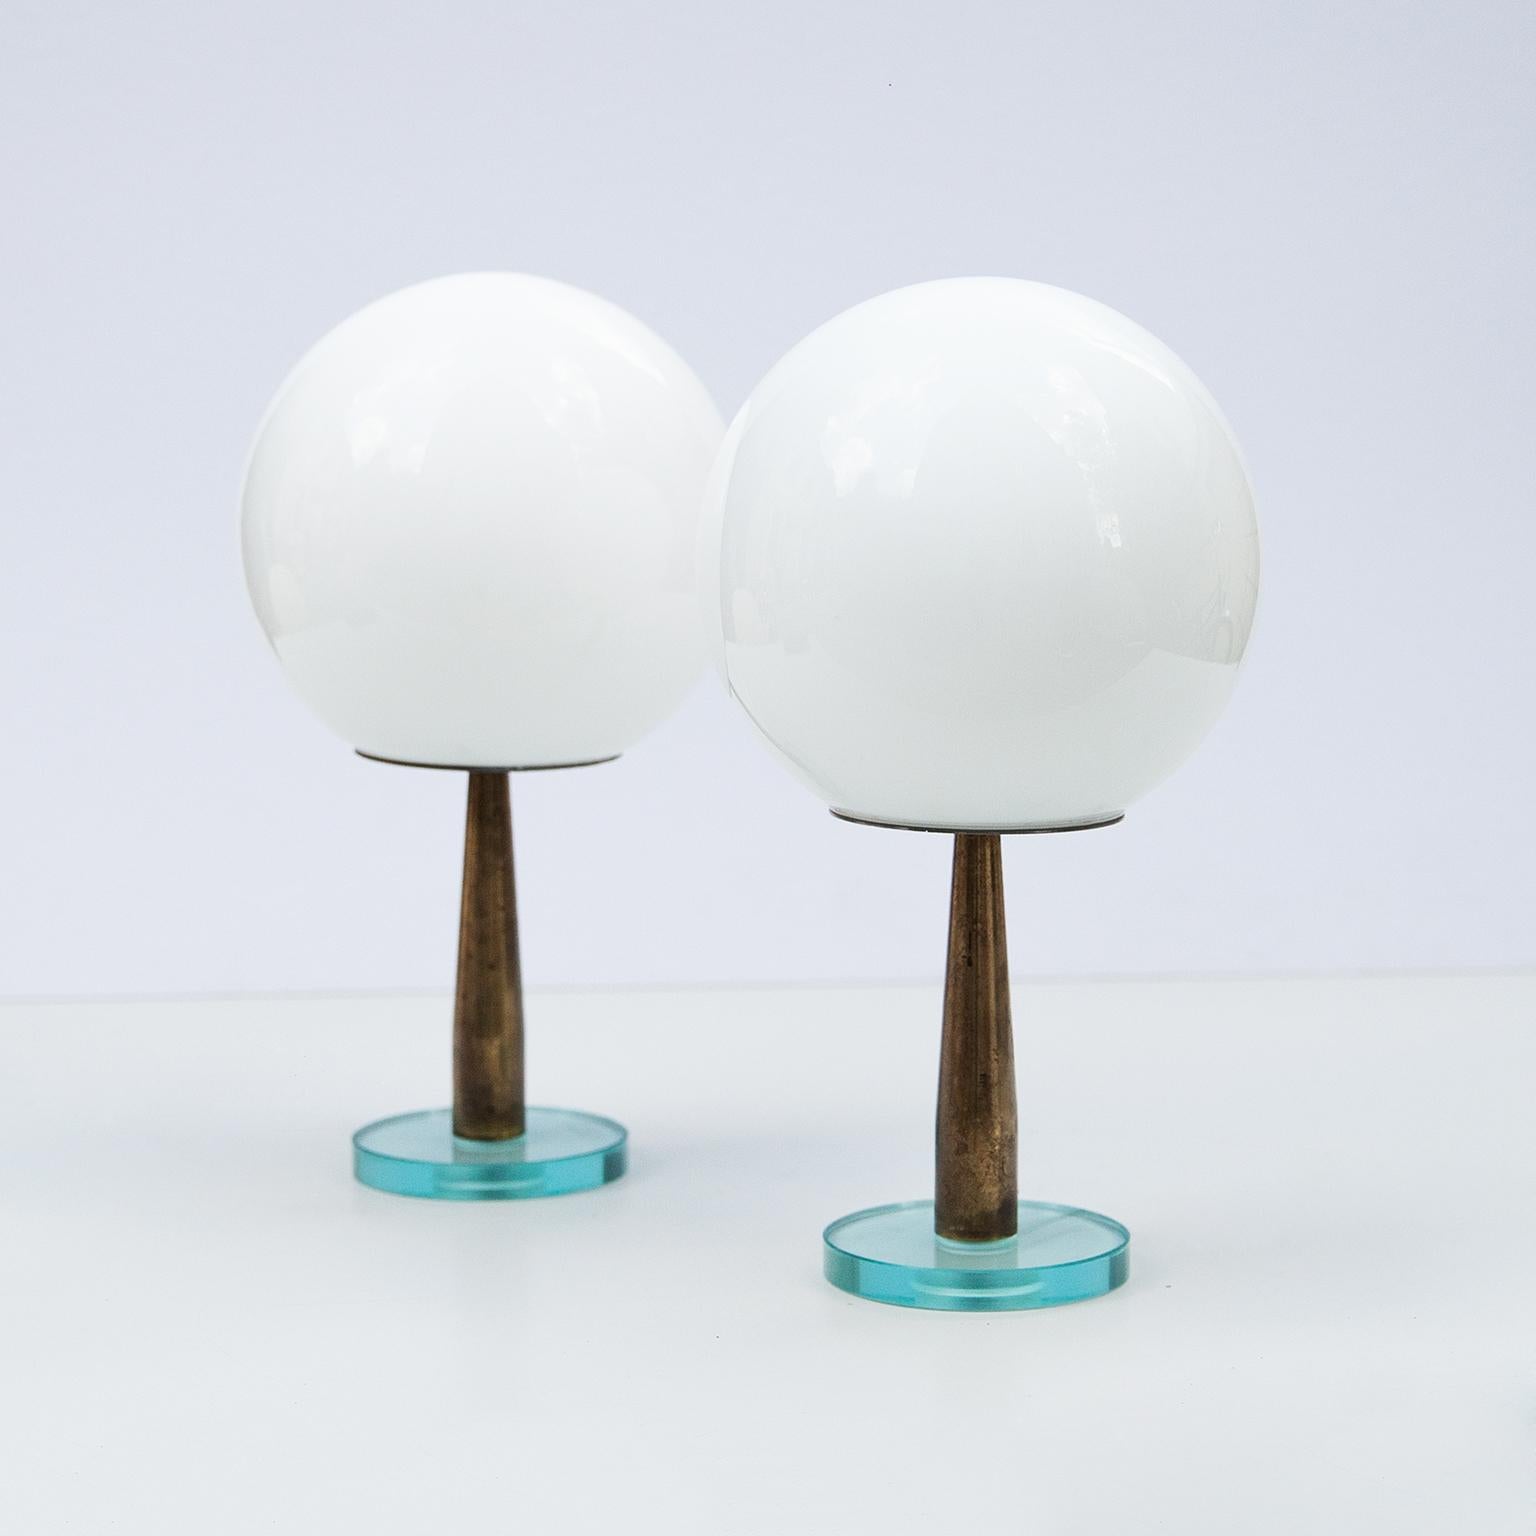 Set of two Italian minimalistic table lamps attributed to Fontana Arte, Italy 1950s. Mounted on a round glass base with a brass stand and white glass balls. Excellent condition.